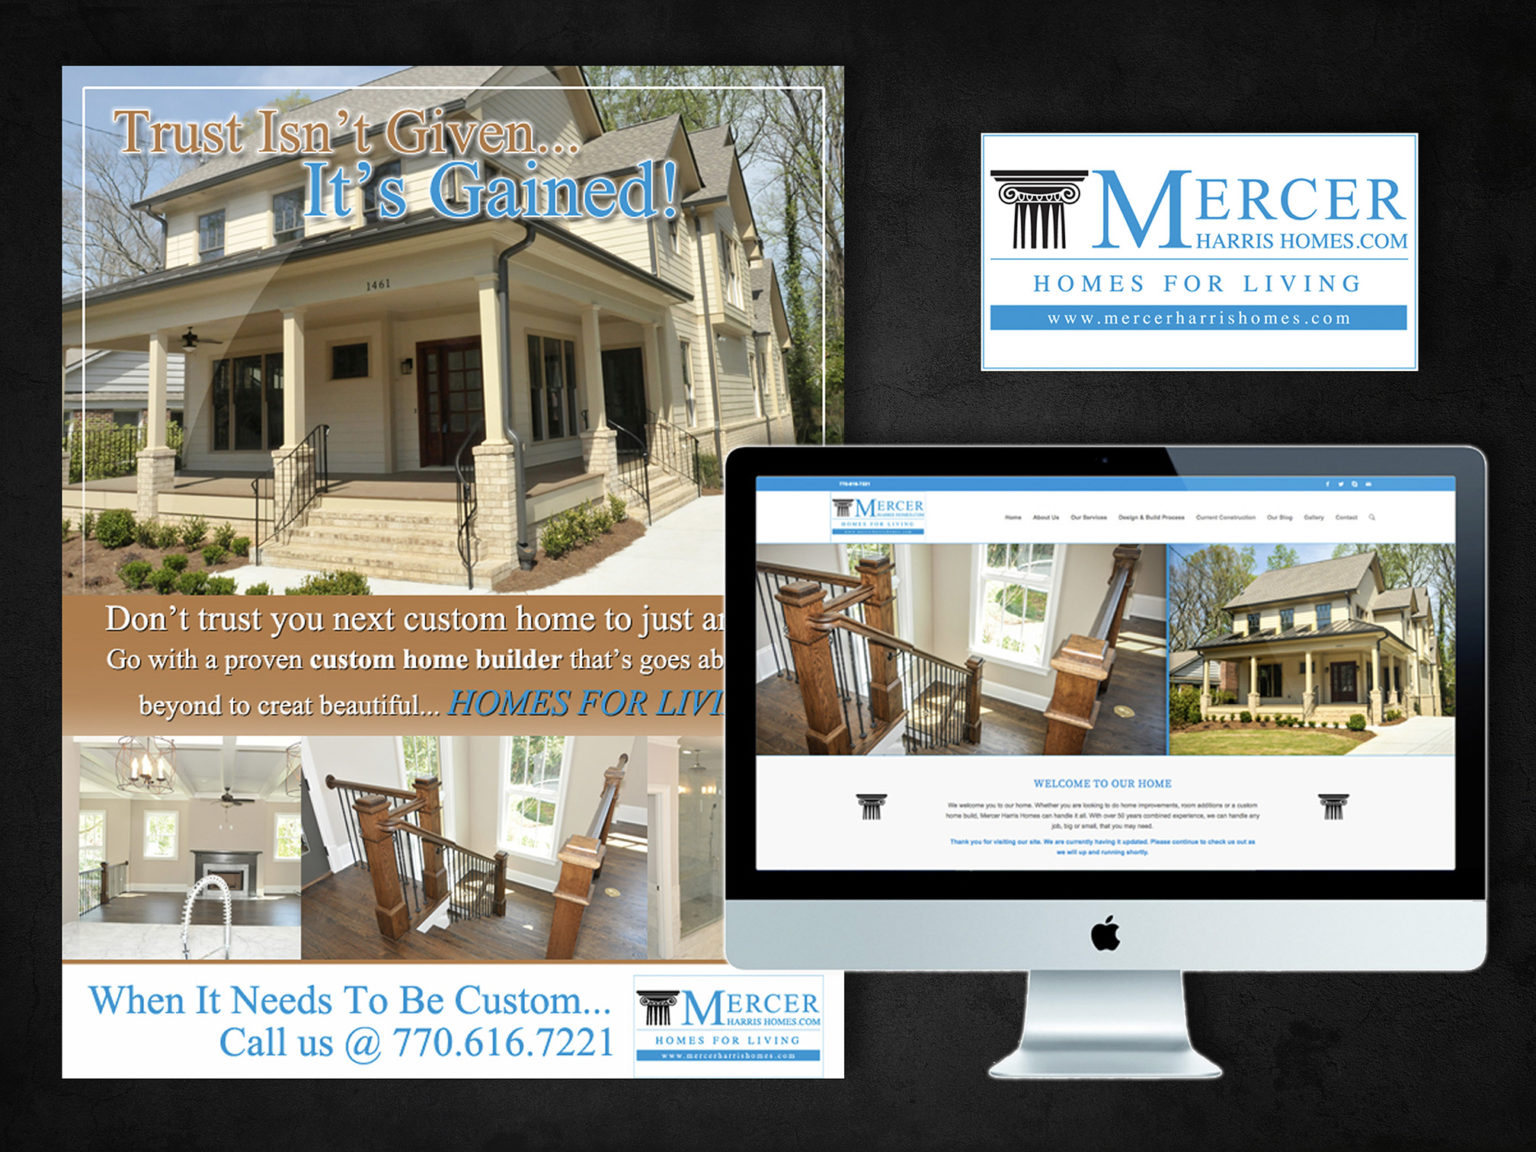 Mercer Harris Homes Brand Image, Print Ad & Website • Designed by: Designs In Motion, Inc.